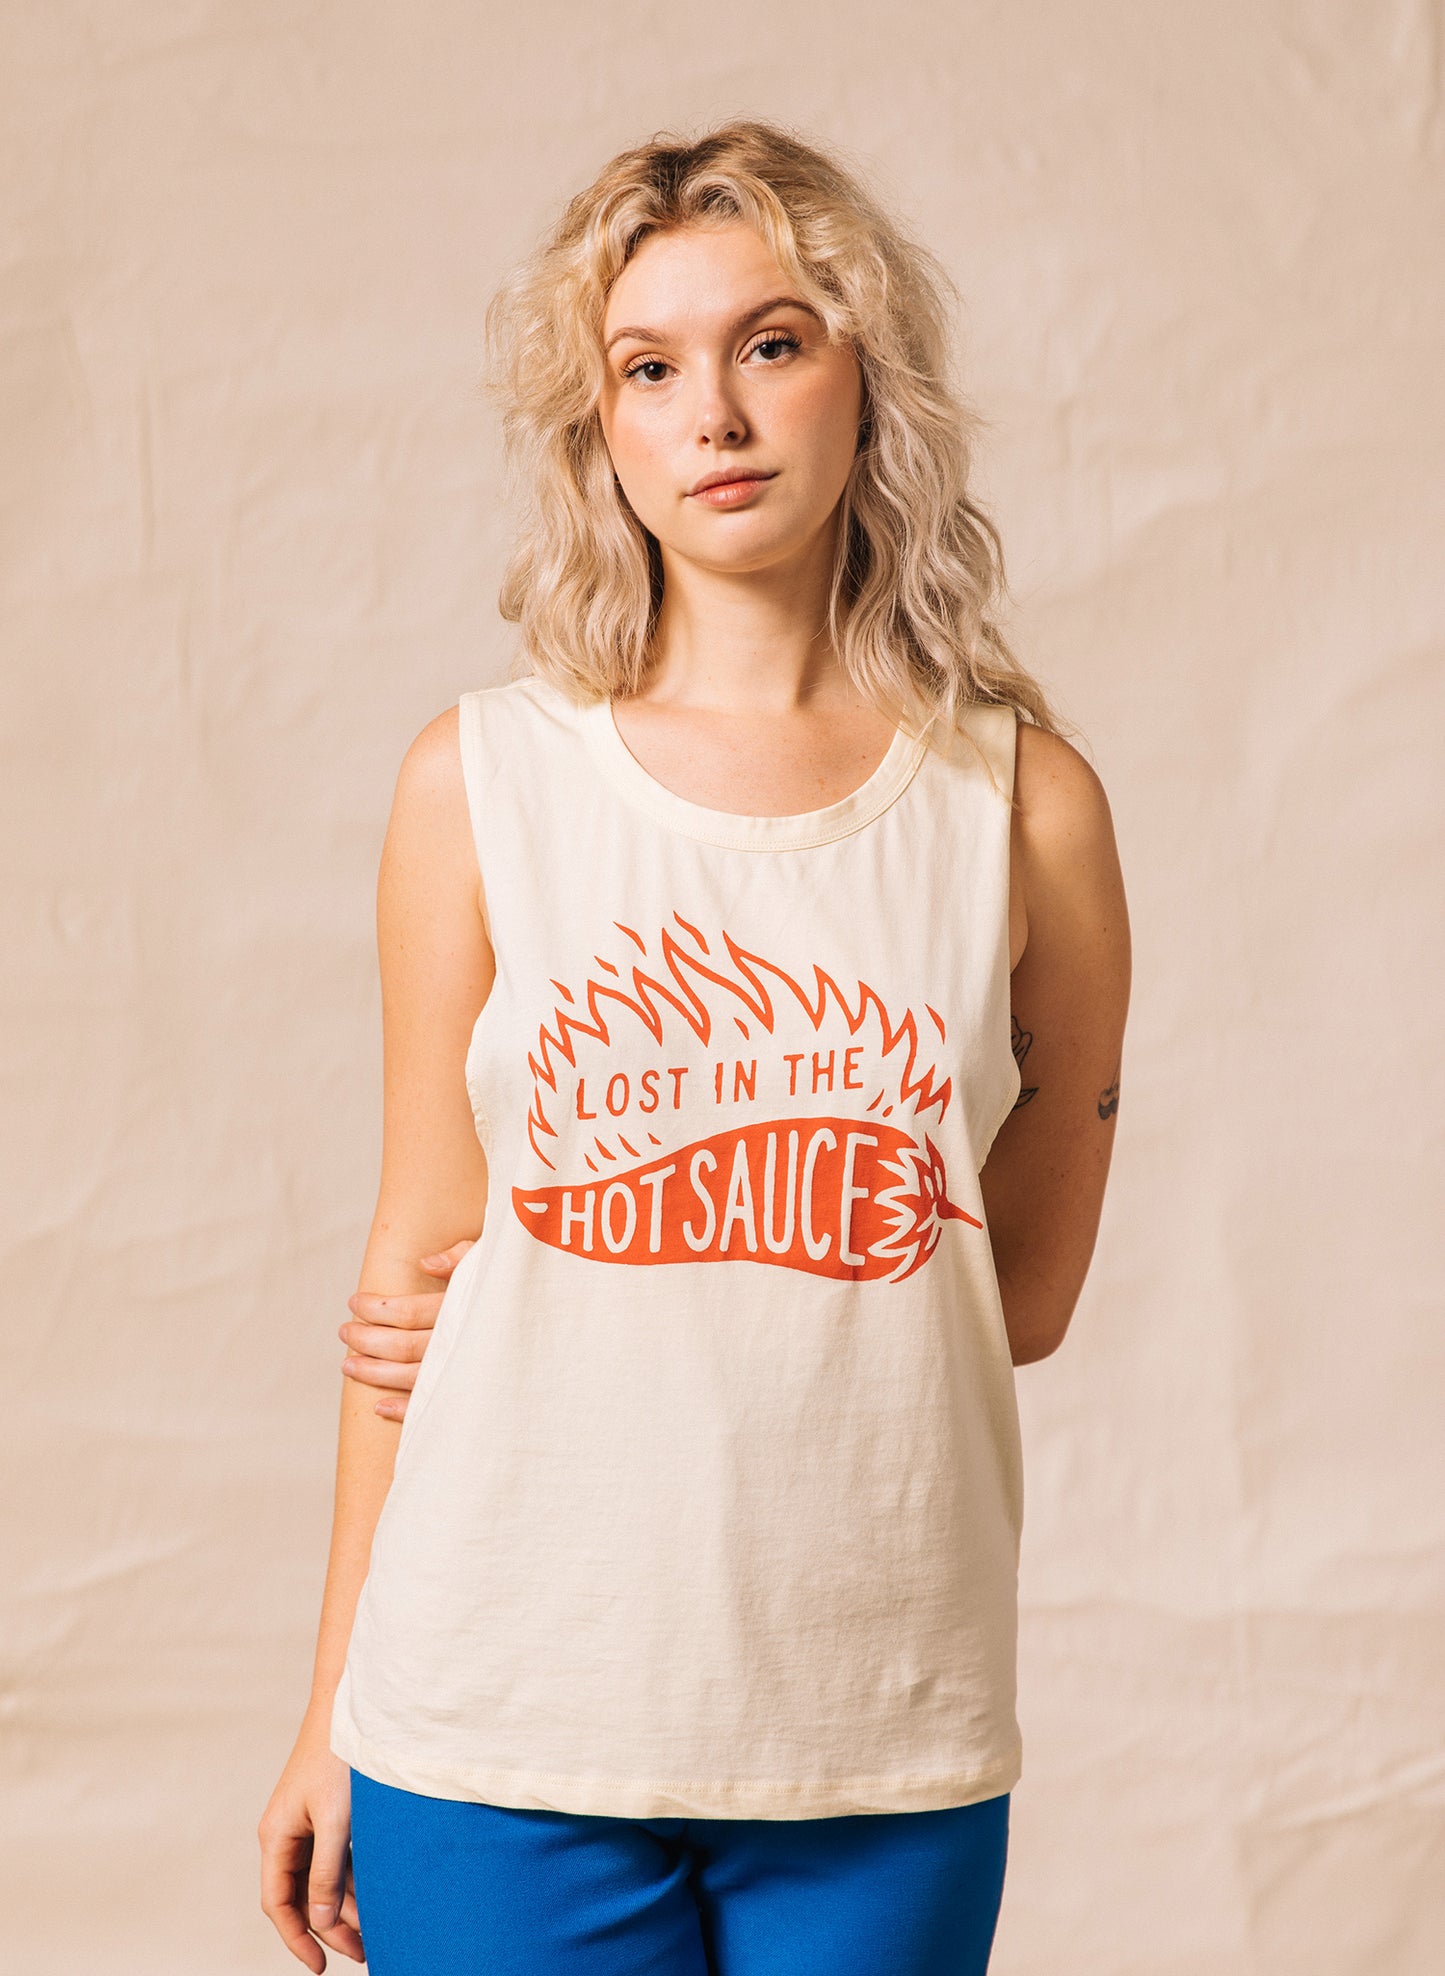 Lost in the Hot Sauce Muscle Tee